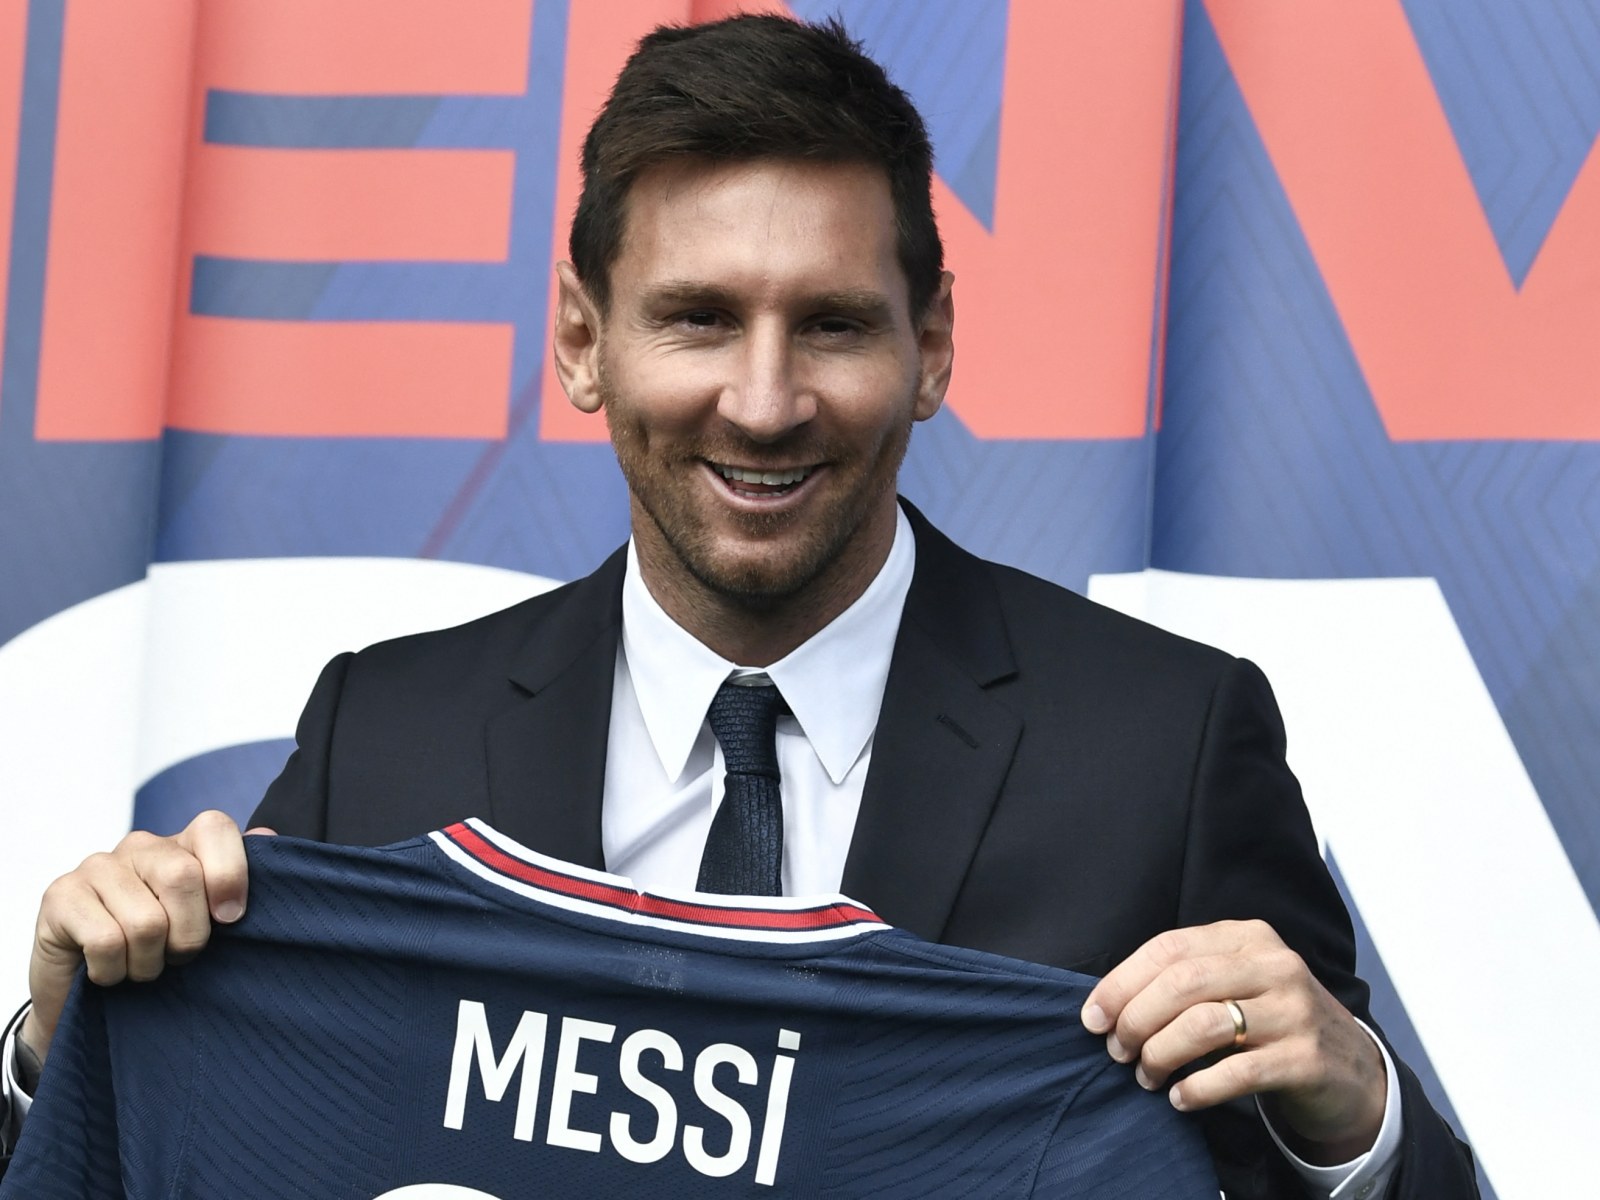 Fact Check: Did Lionel Messi Signing Double PSG's Instagram Followers?